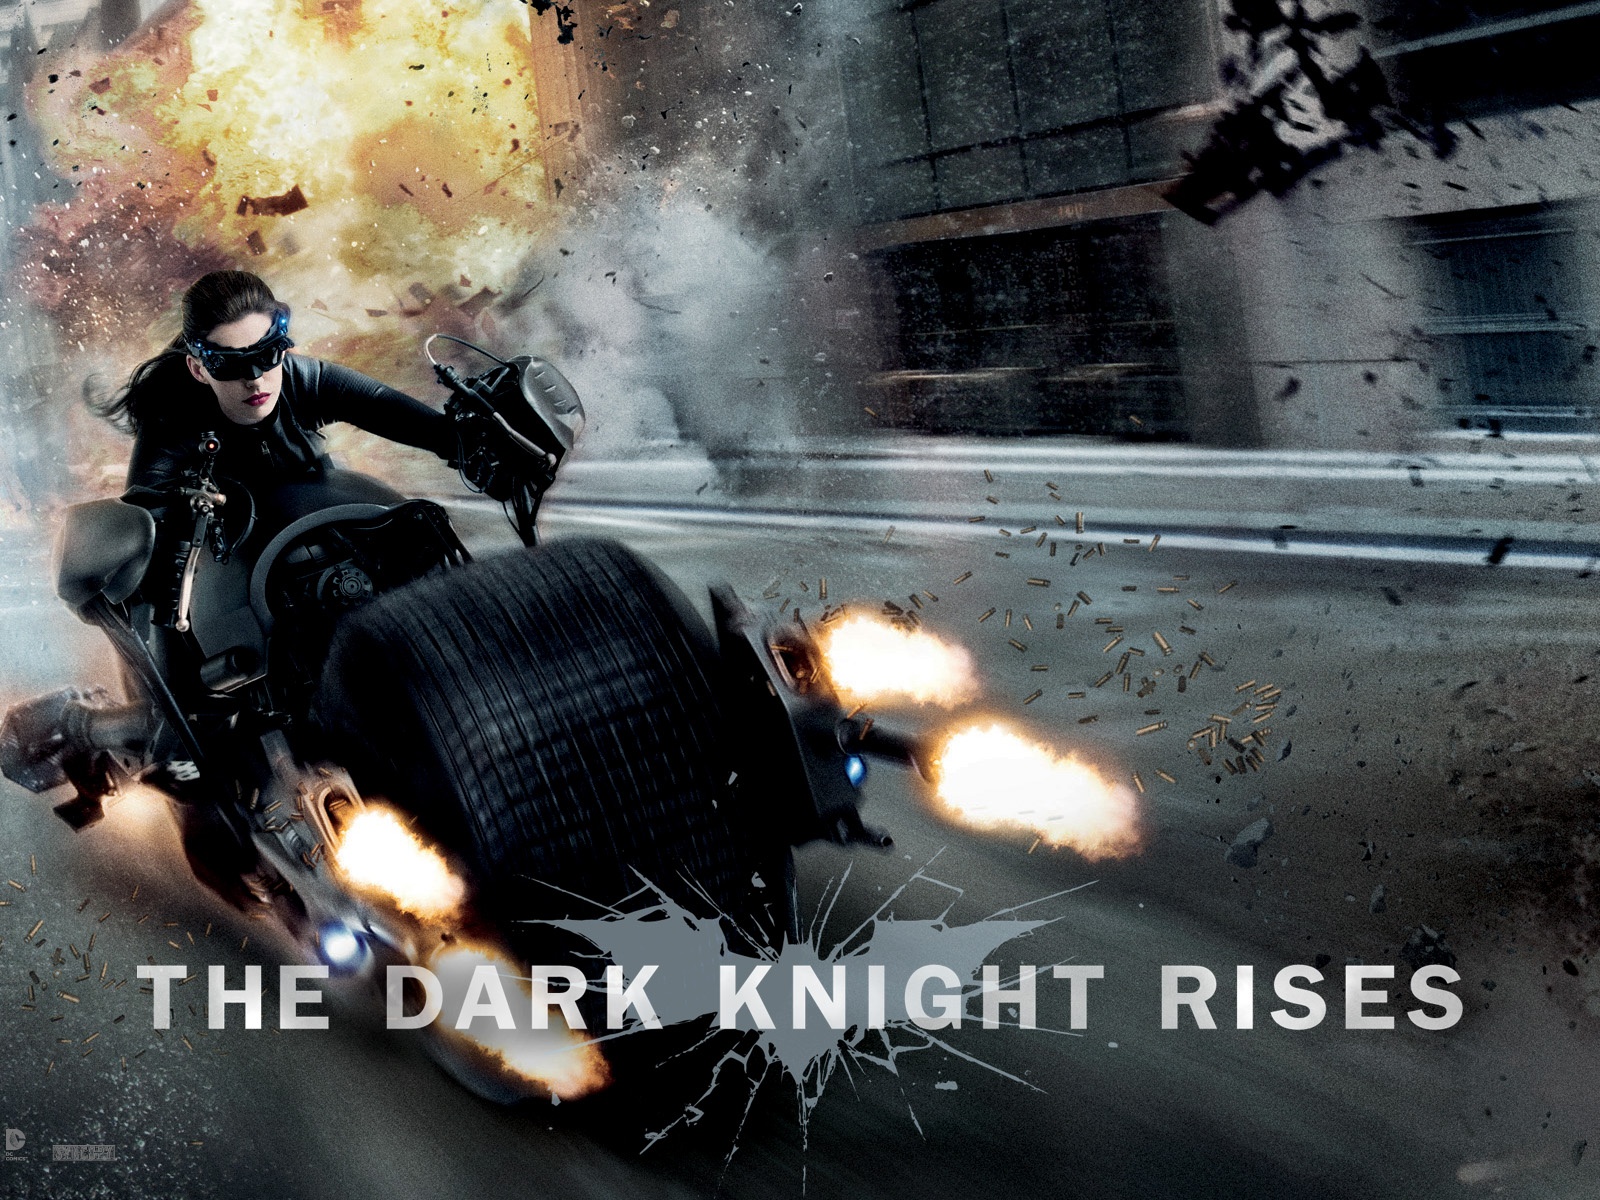 Free Photos of Movies, Anne Hathaway in the Dark Knight Rises, on Motorcar, Let Bullets Fly! 1600X1200 free wallpaper download